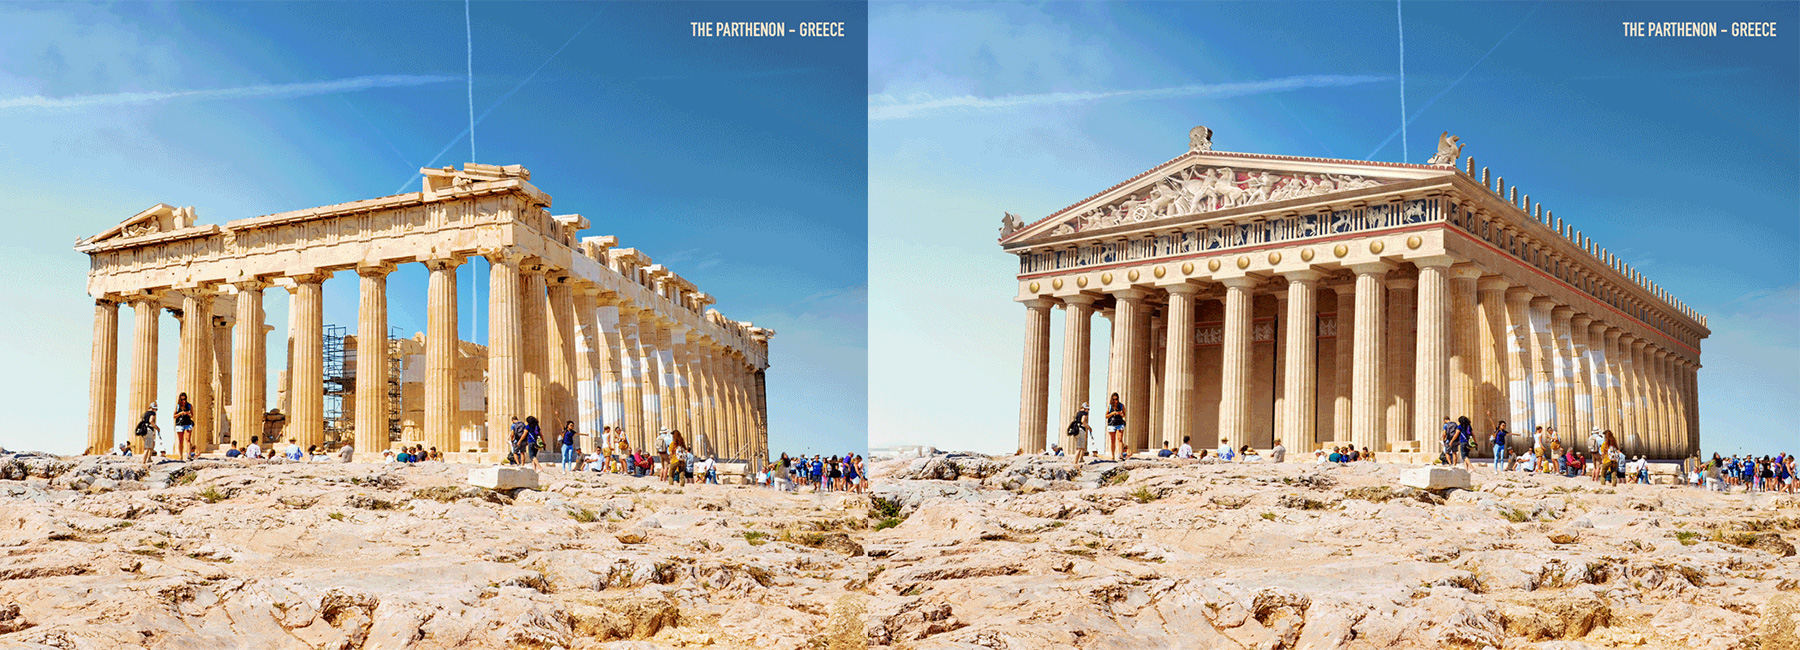 see these 7 ancient ruins wondrously restored before your eyes